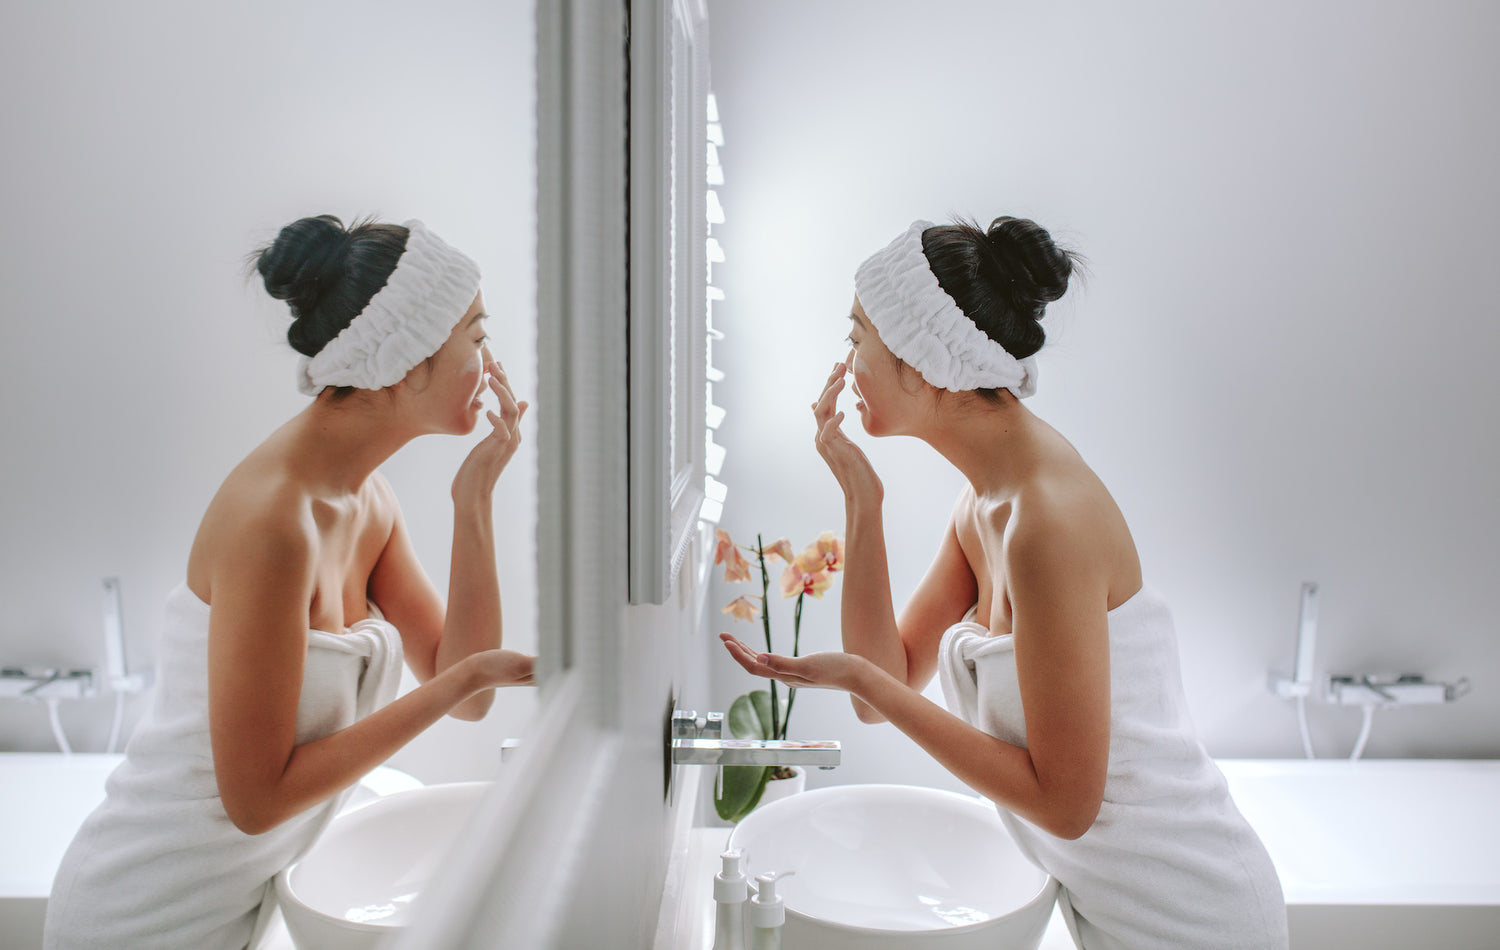 Skin Purging vs. Breakouts: Is Your New Skincare Helping or Hurting?